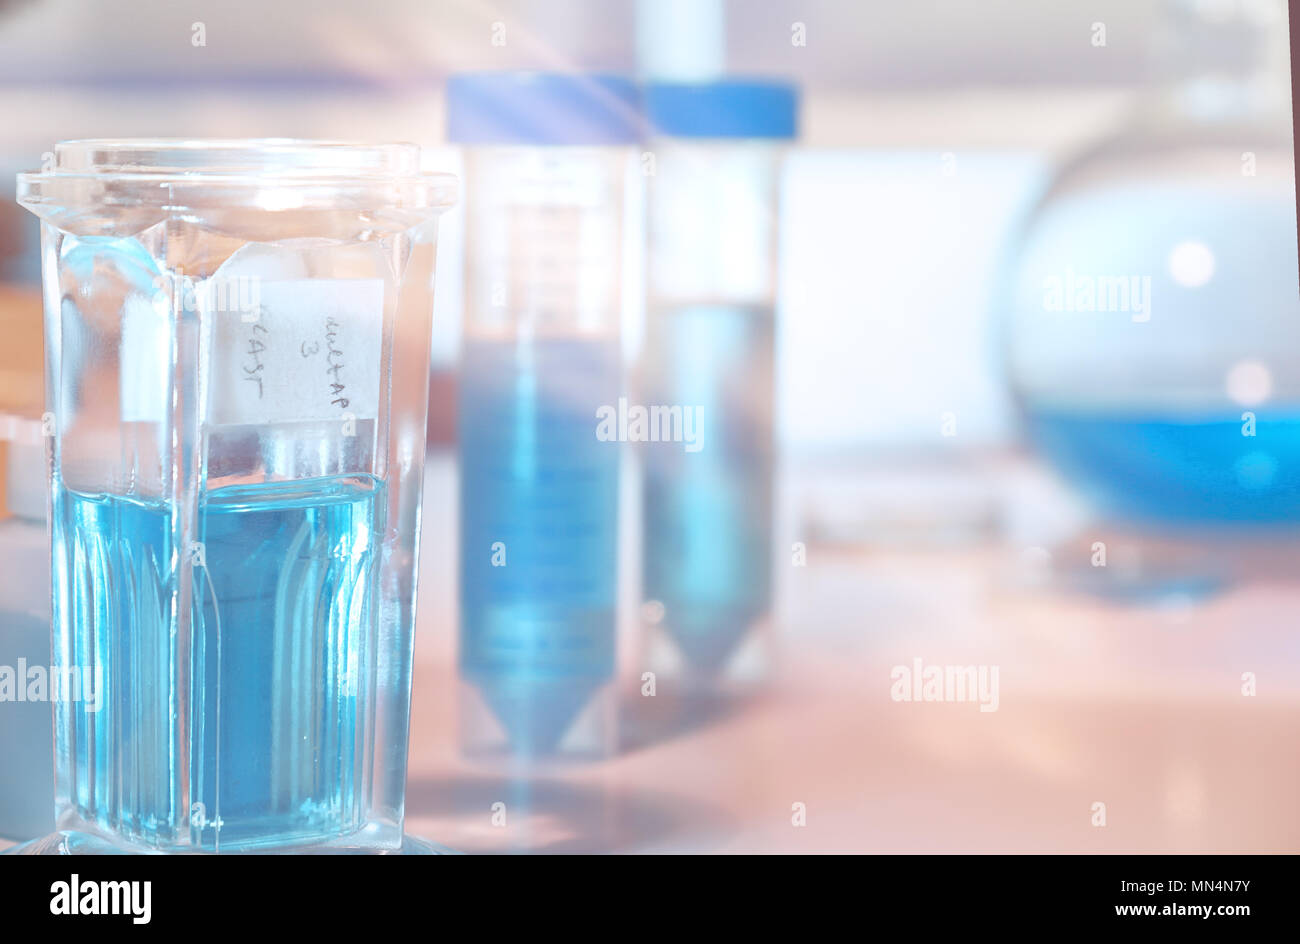 Scientific background. Tools for histopathology, fixative vials for biopsy tissue, rask of slide glasses in staining solution, space for your text. Stock Photo